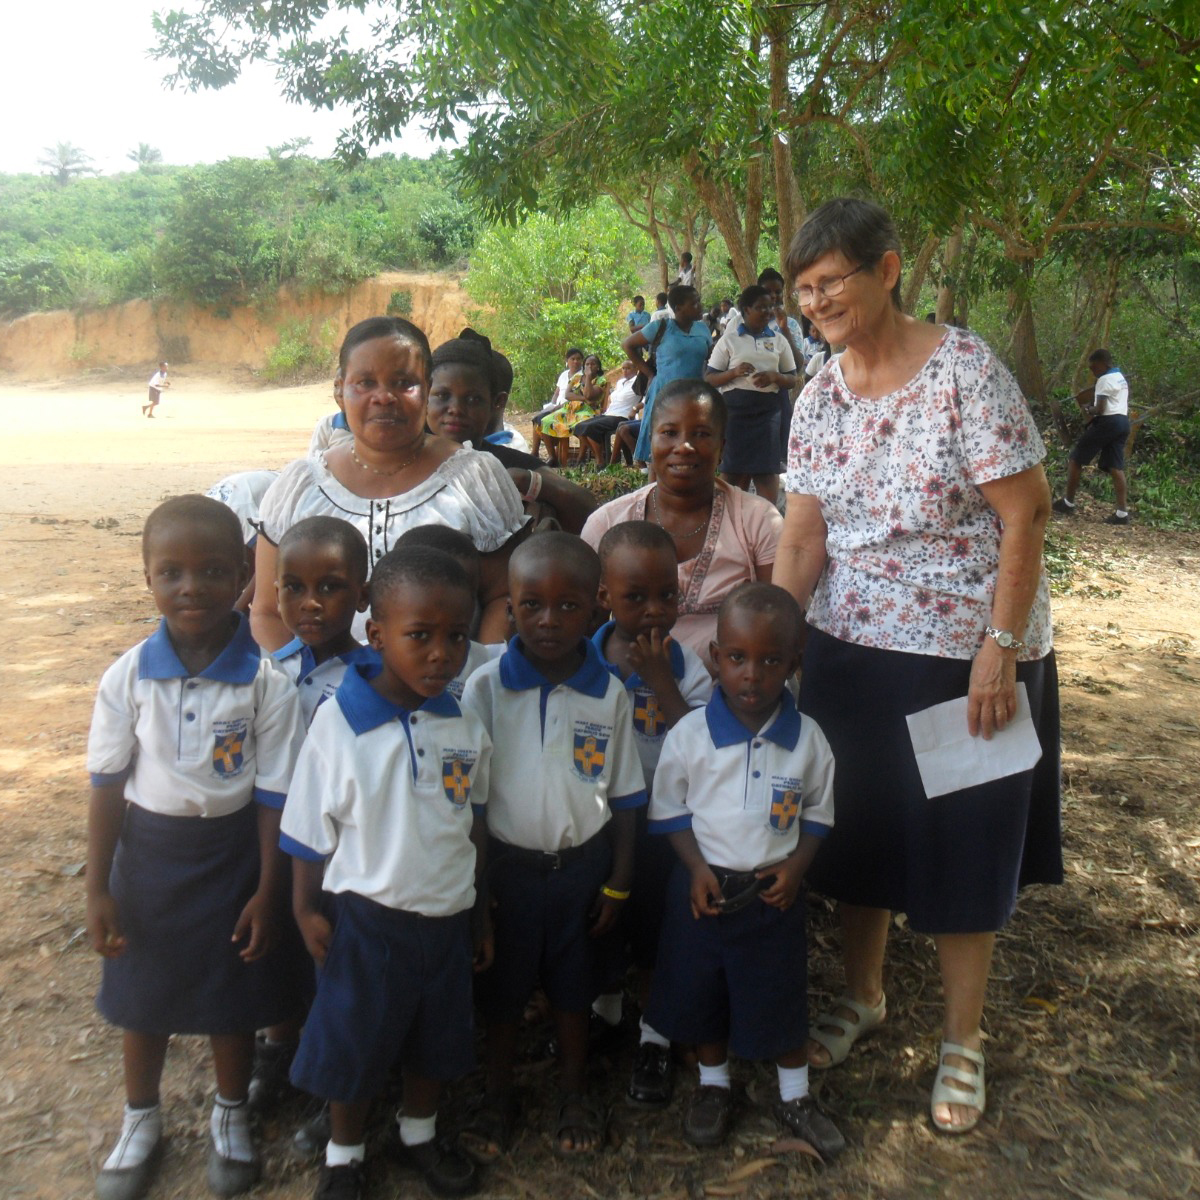 Sister Mary Ann Matachinskas working with children in local community